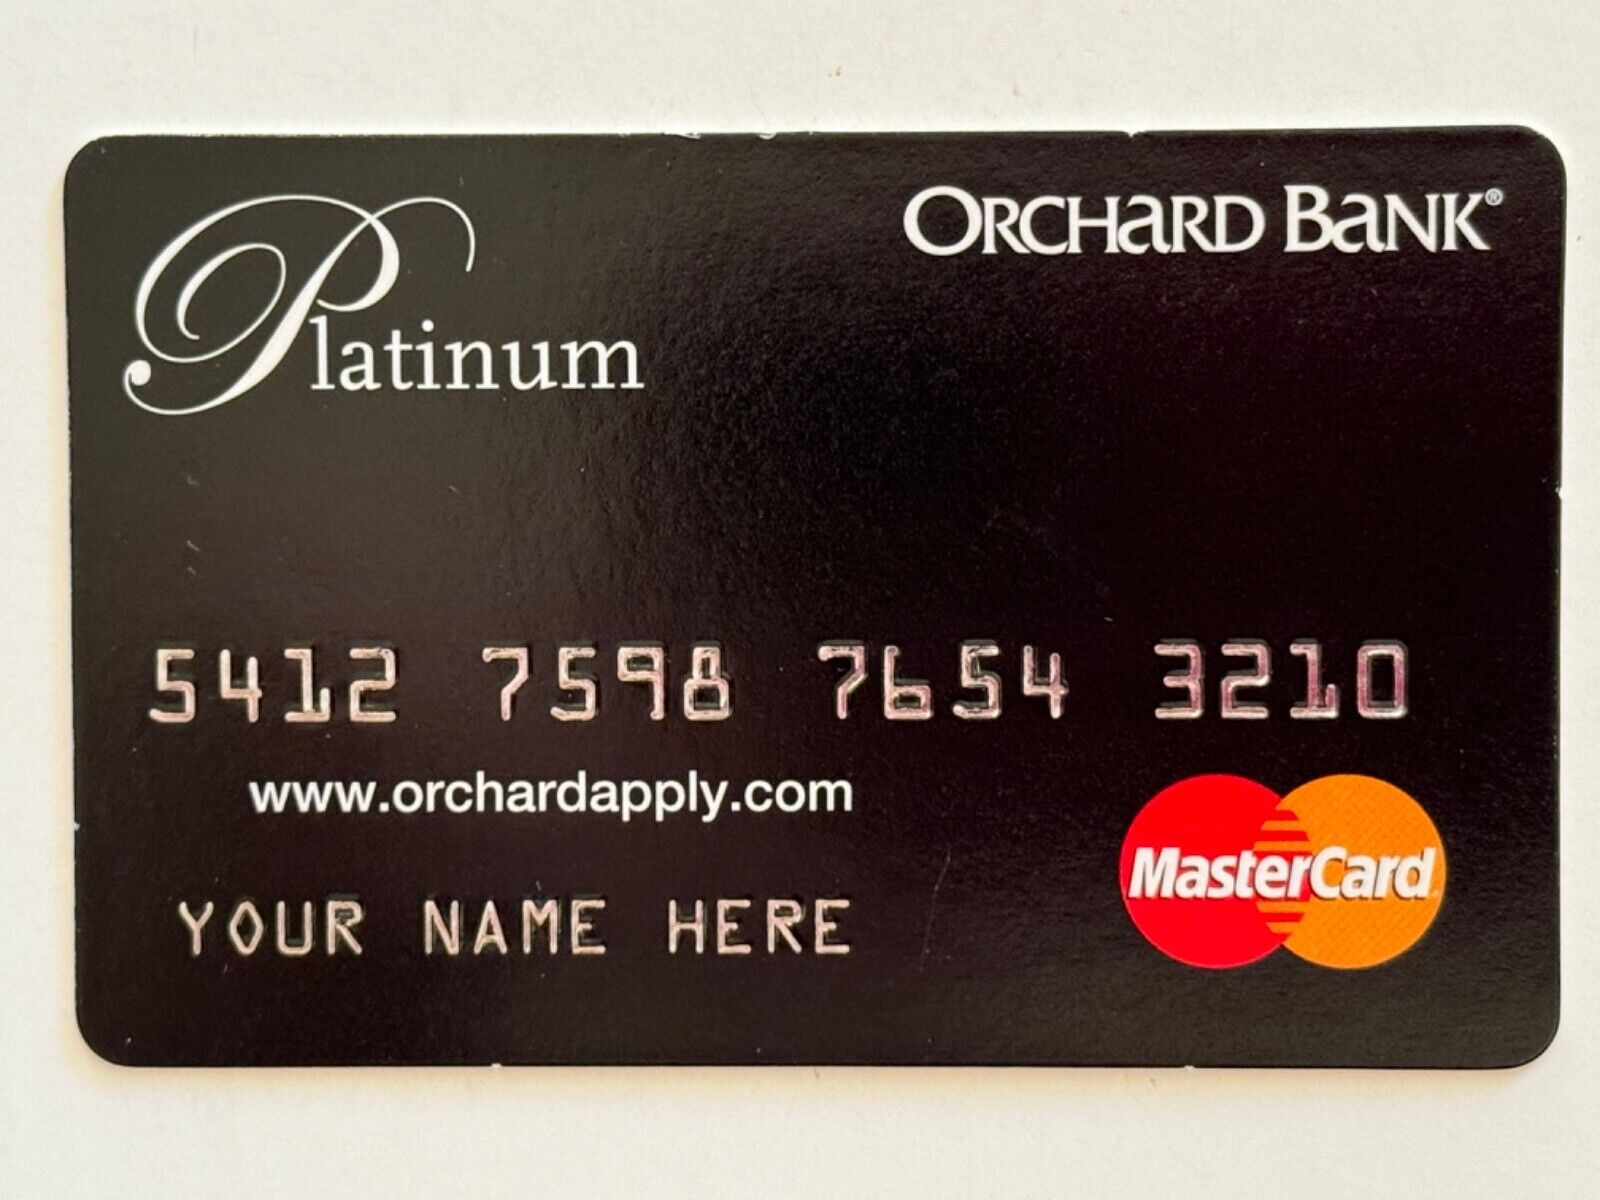 Orchard Bank Platinum Credit Card▪️Your Name Here▪️Not a Valid Credit Card